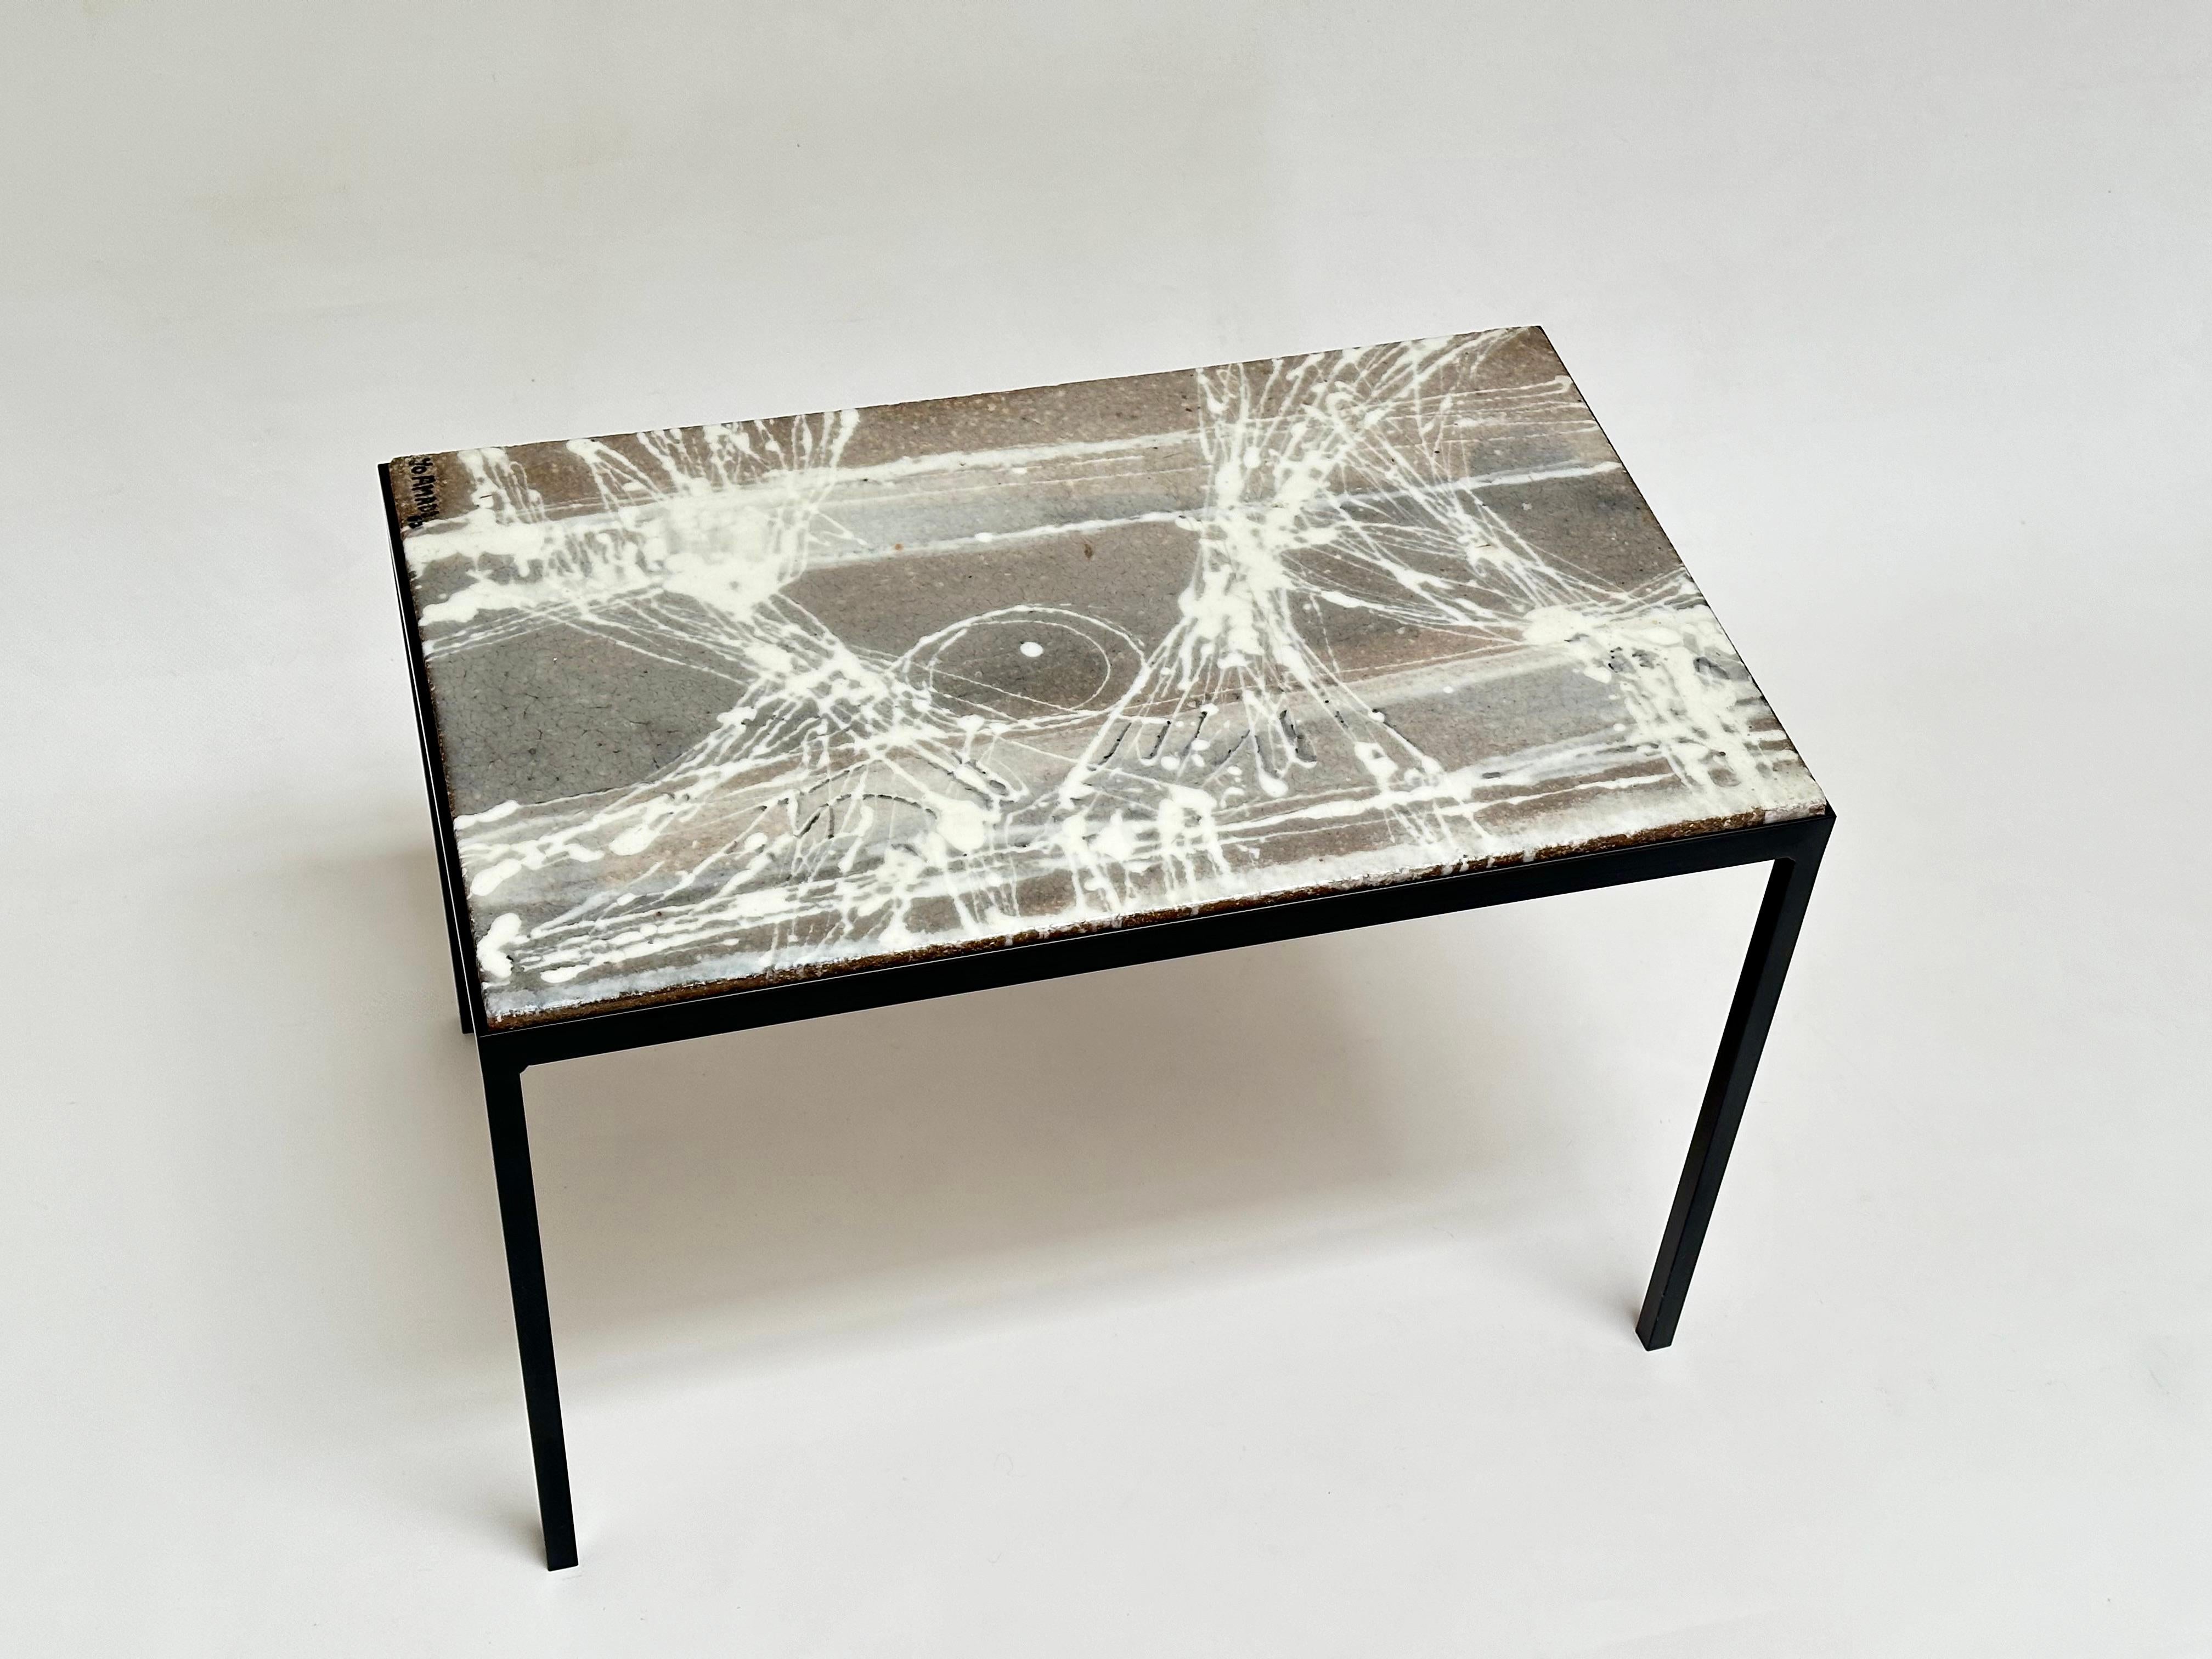 French Decorative Low Table, Jo Amado, France 1962 For Sale